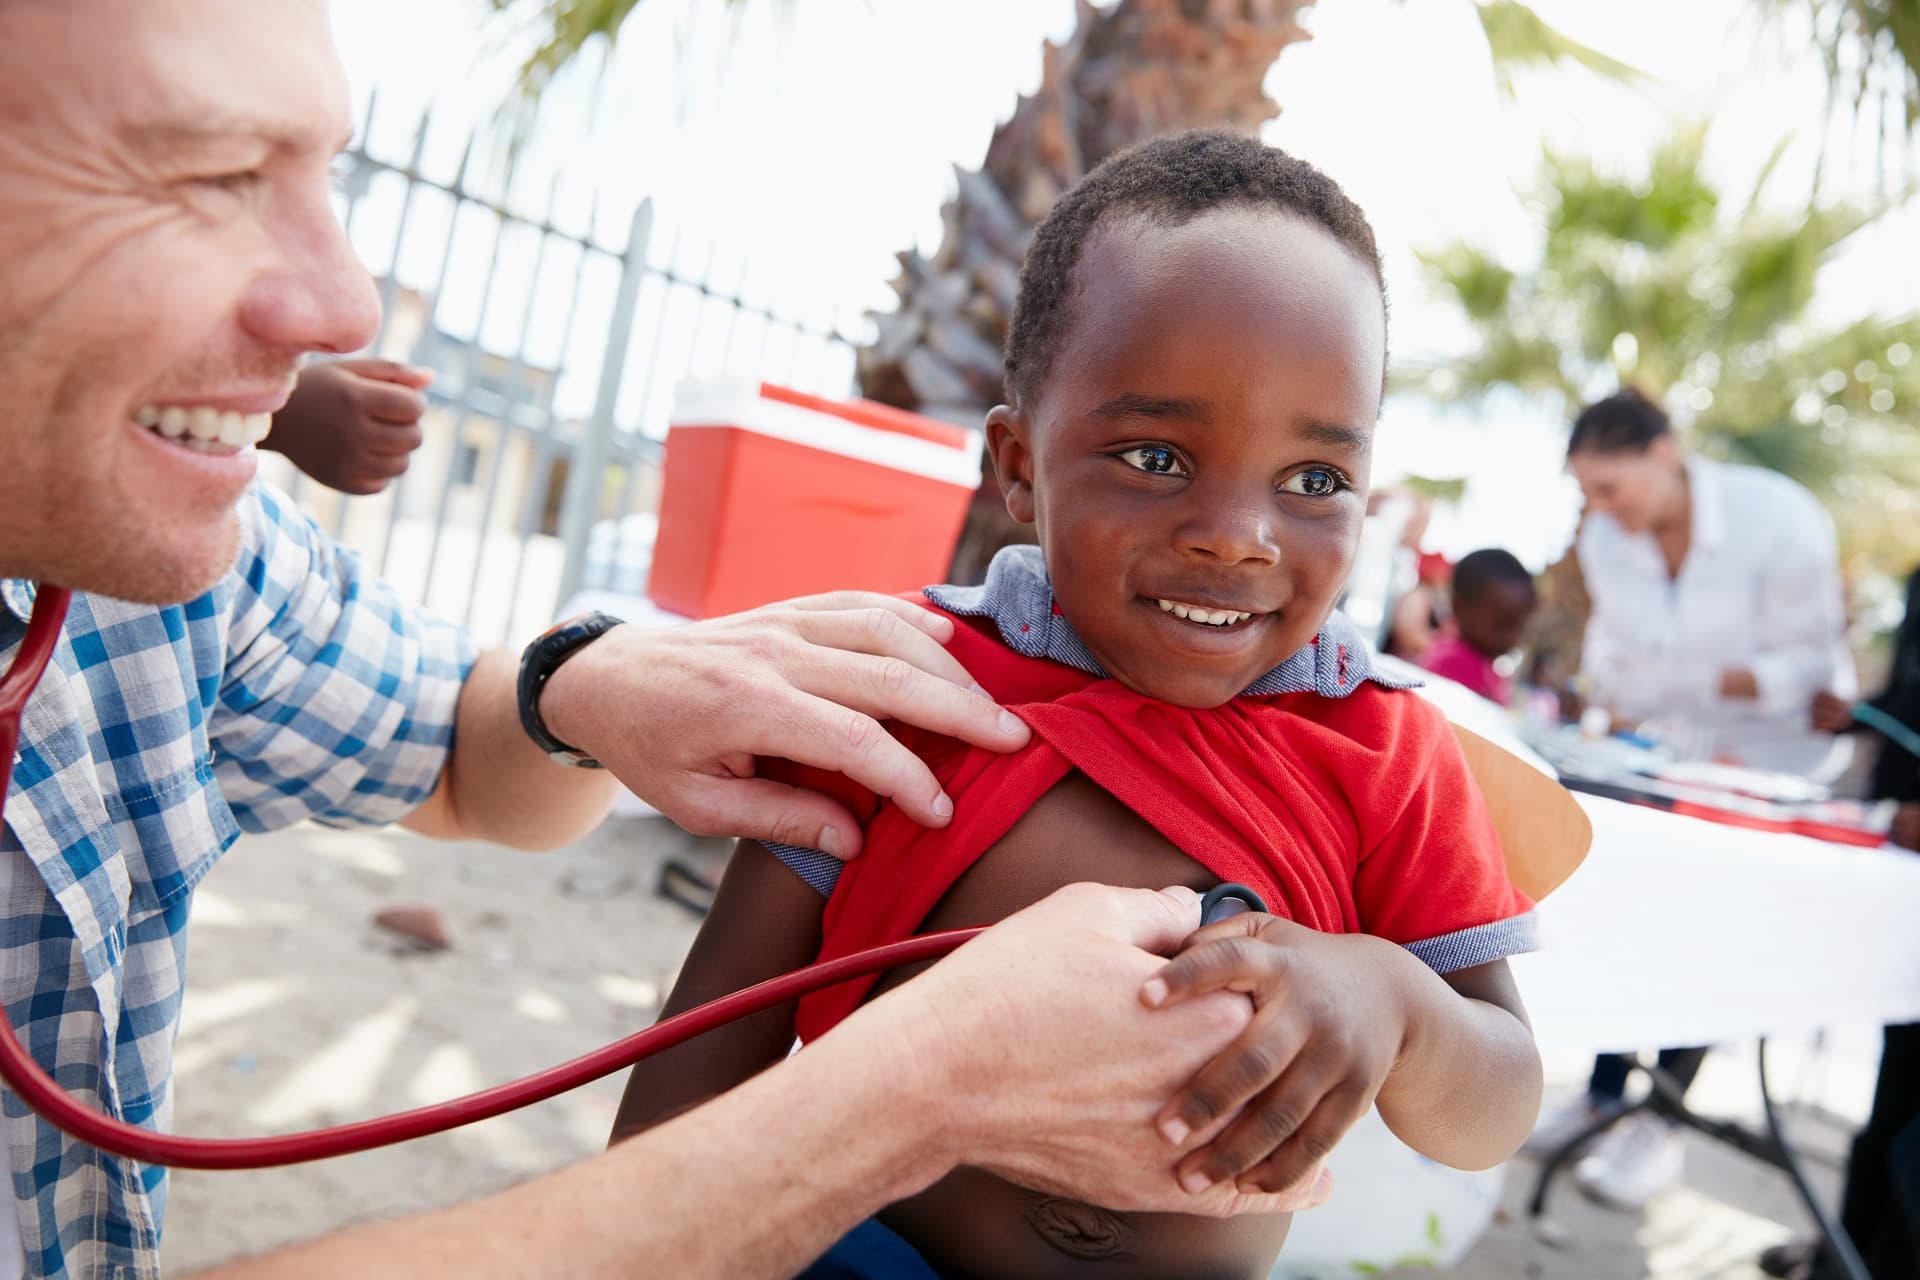 A nurse holds a stethoscope to a child's chest